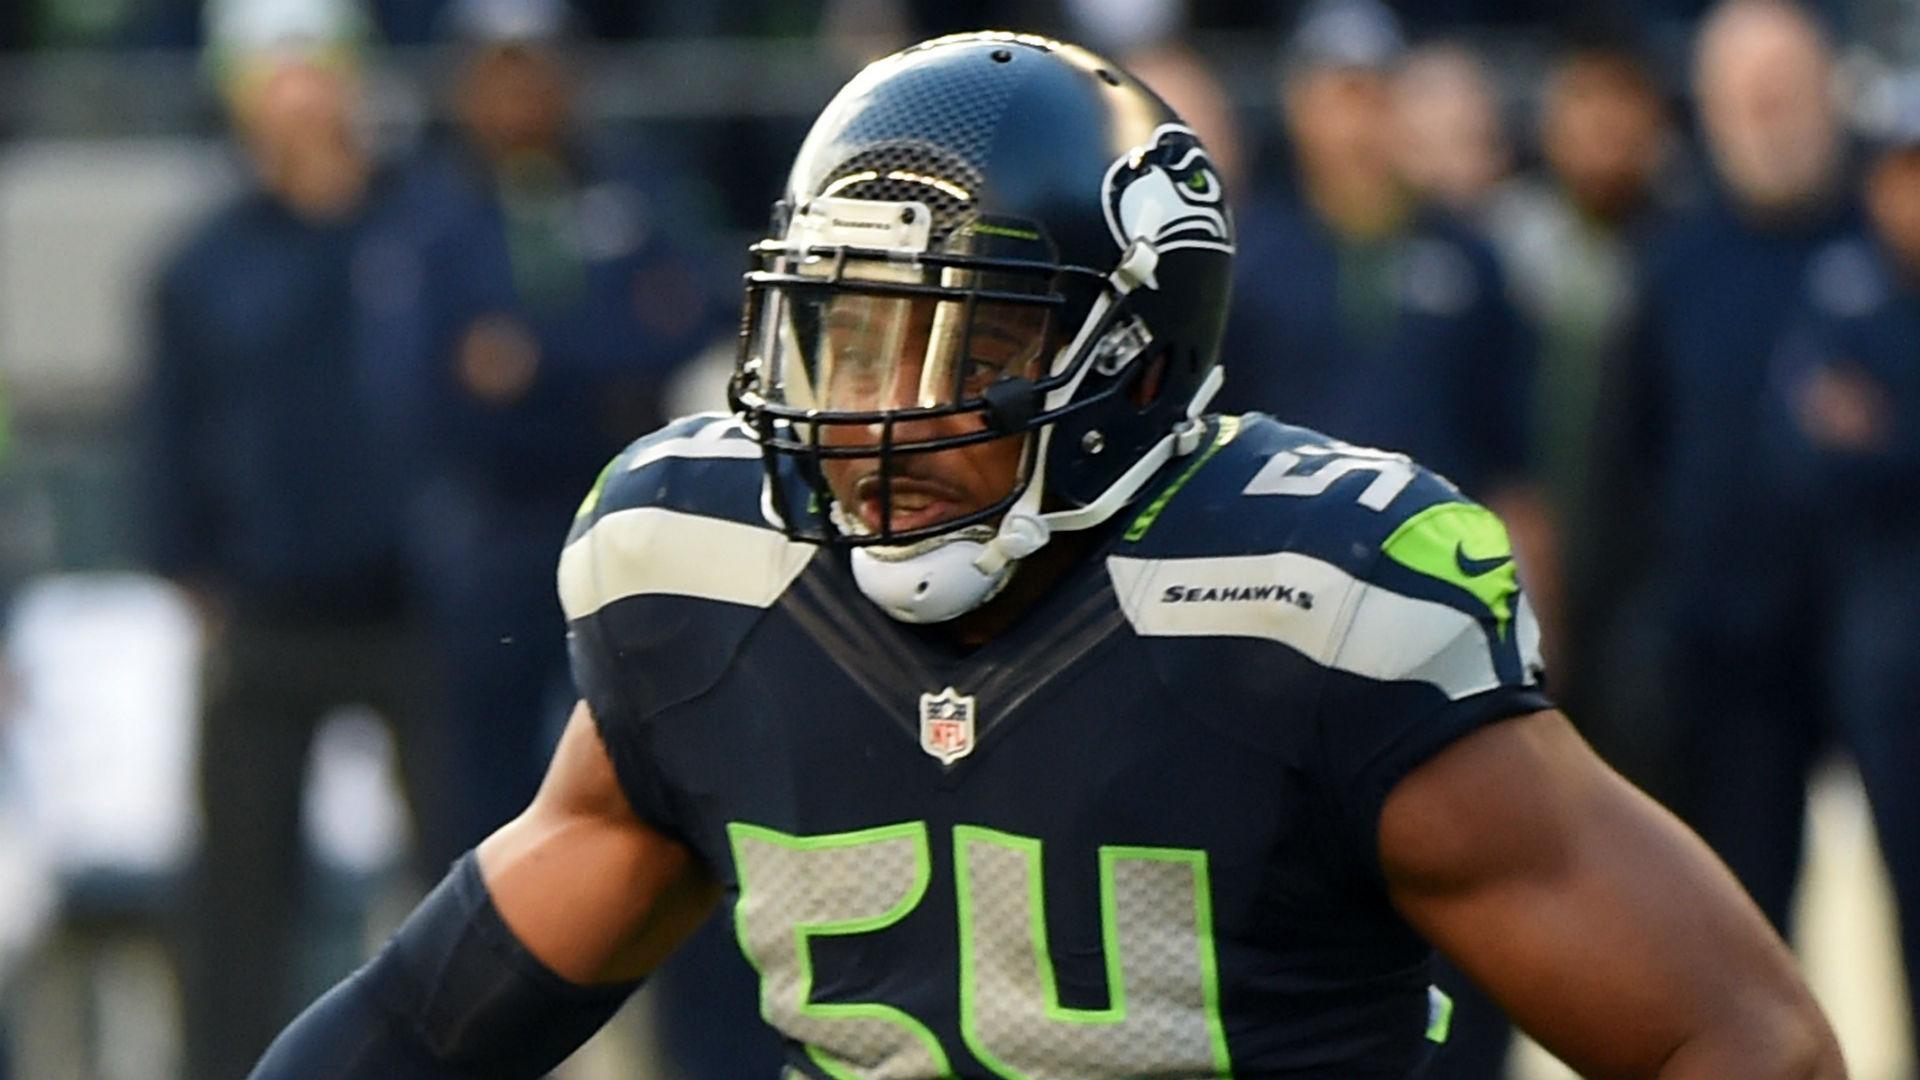 Seahawks' Bobby Wagner is looking for his new money, too. NFL